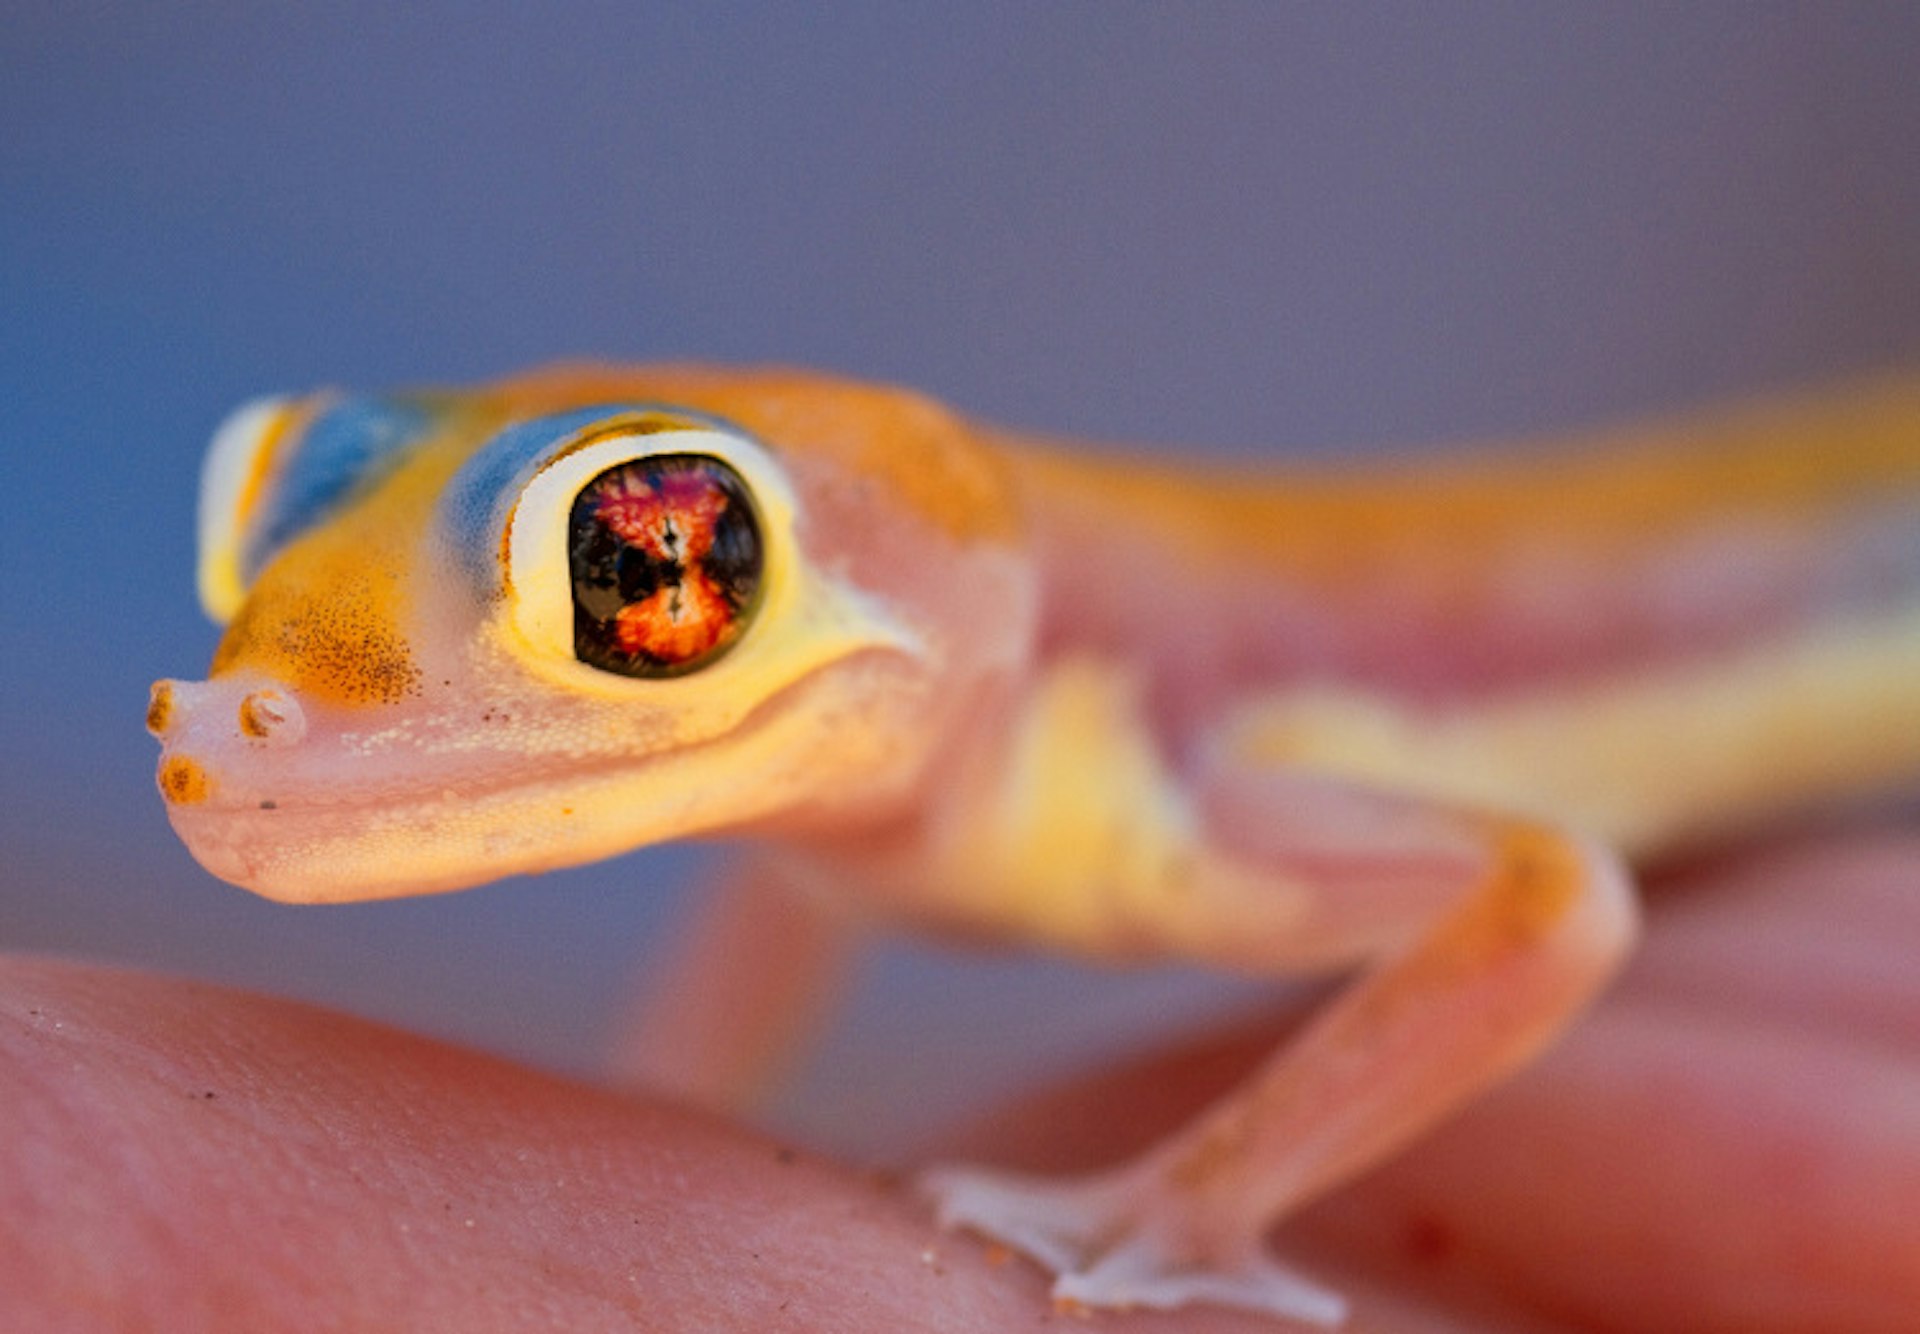 A brightly coloured palmato gecko. Image by Klaus Brandstaetter / Getty Images